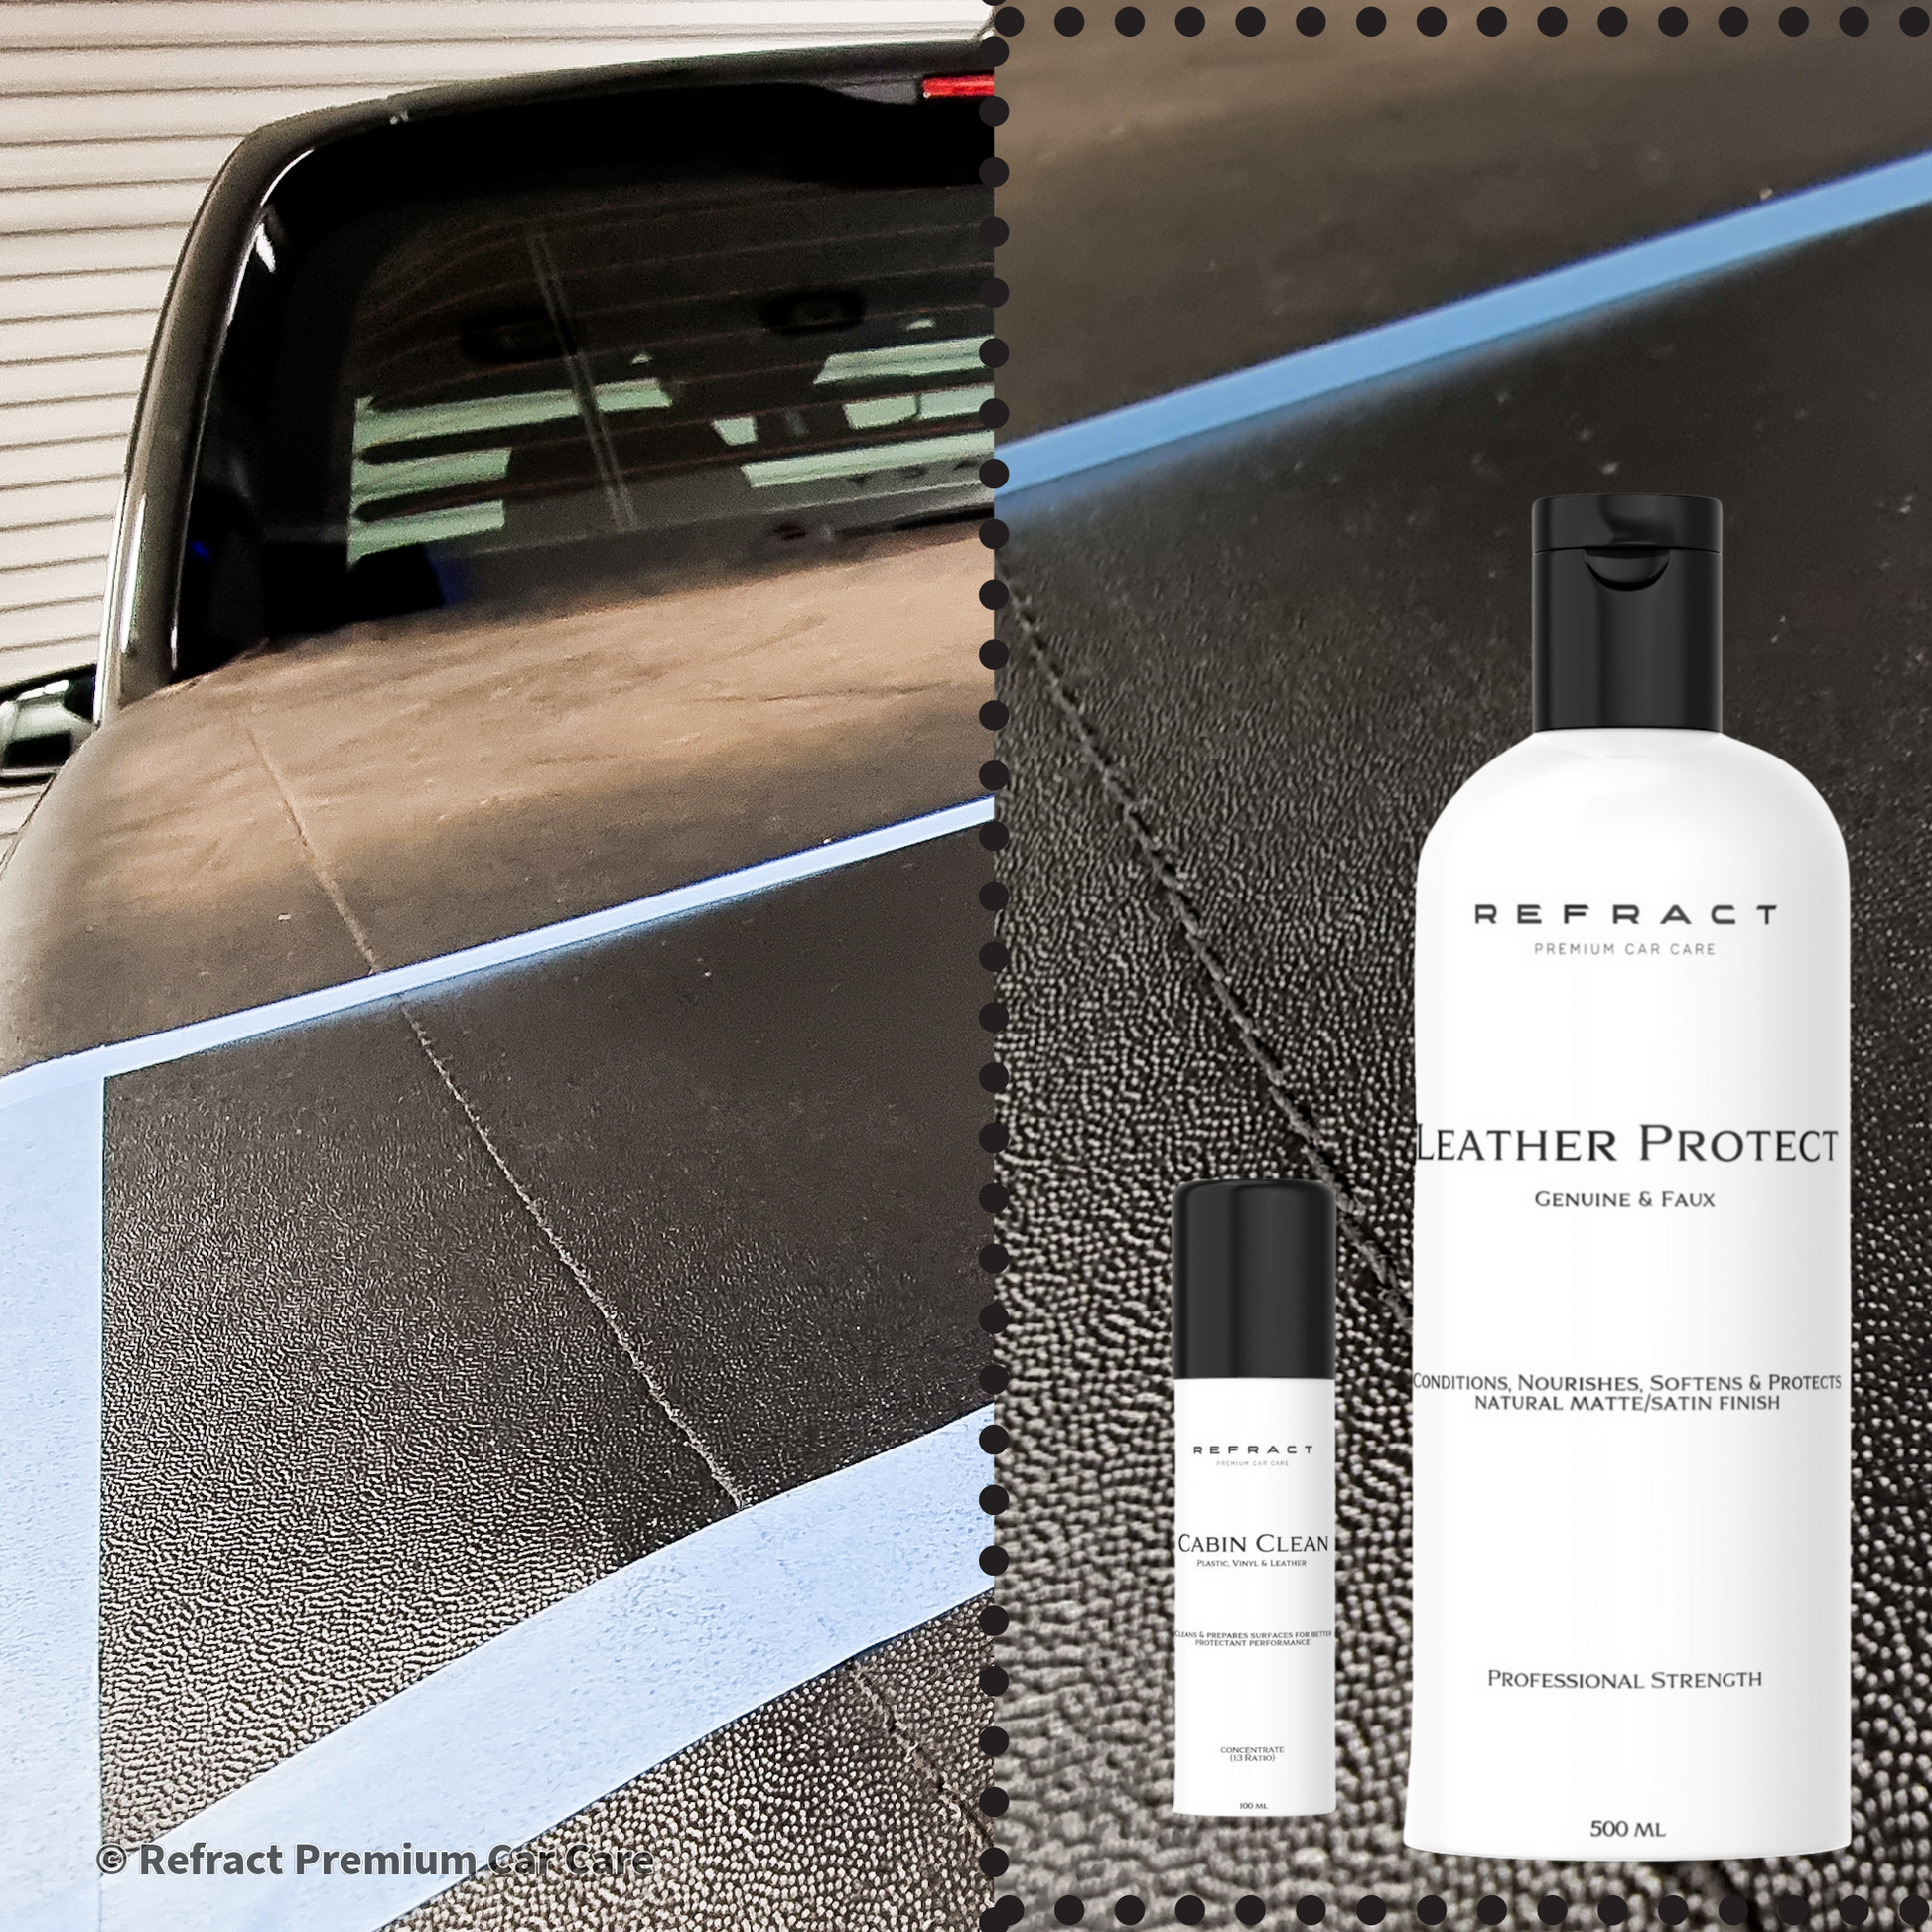 Refract Premium Car Care Products Refract Leather & Vinyl Protect $37.95